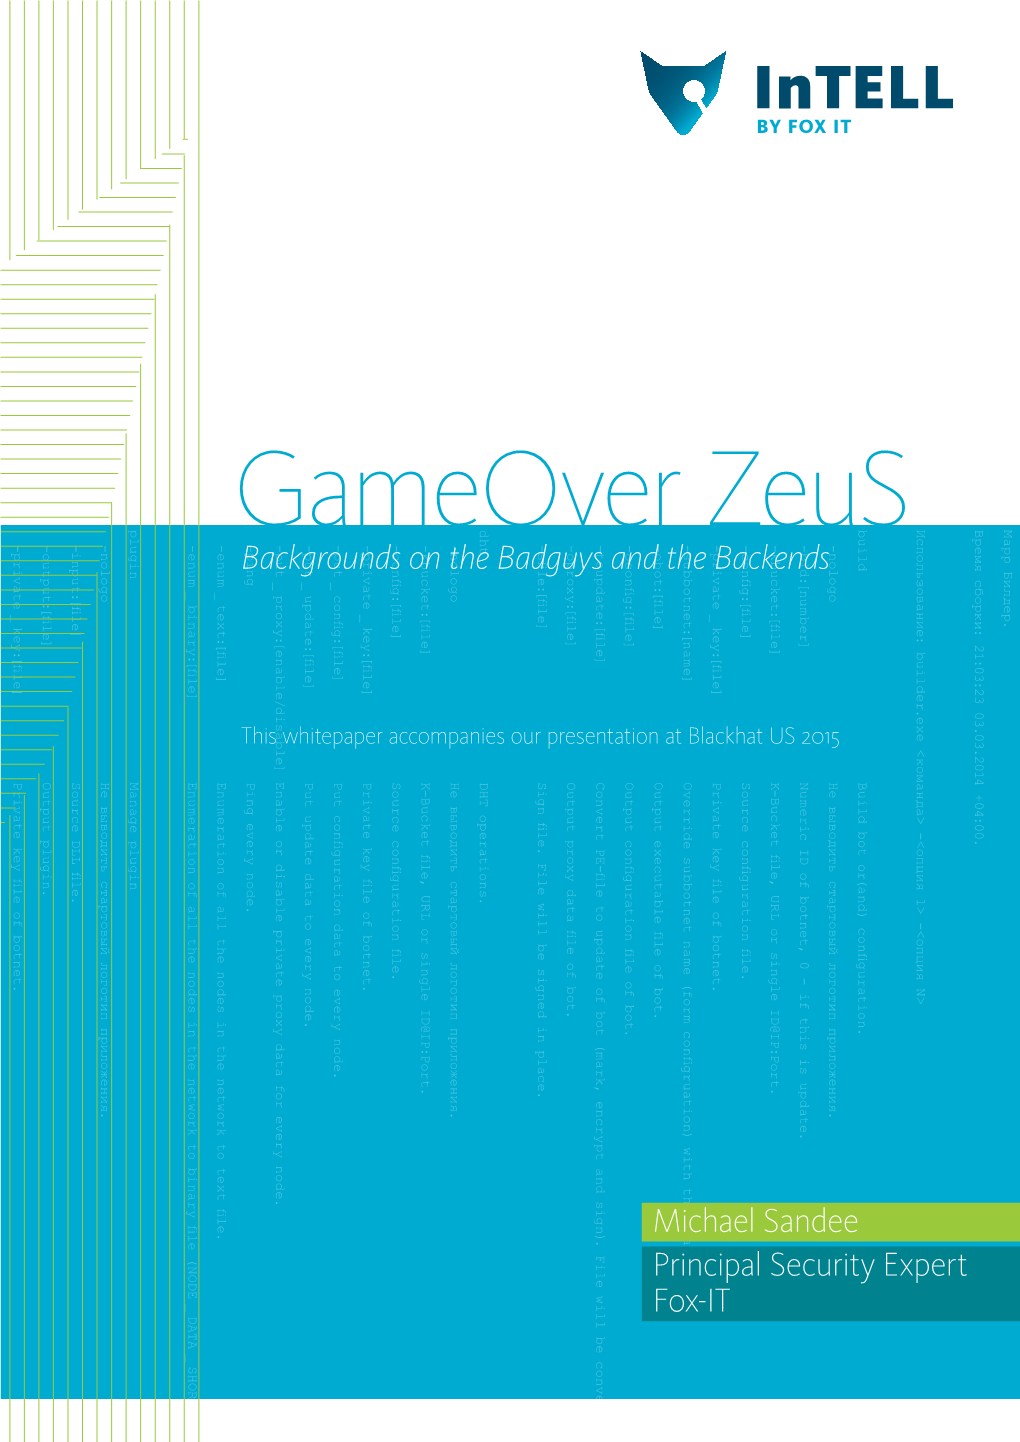 Gameover Zeus -Enum Text:[Fi Le] Enumeration of All the Nodes in the Network to Text Fi Le